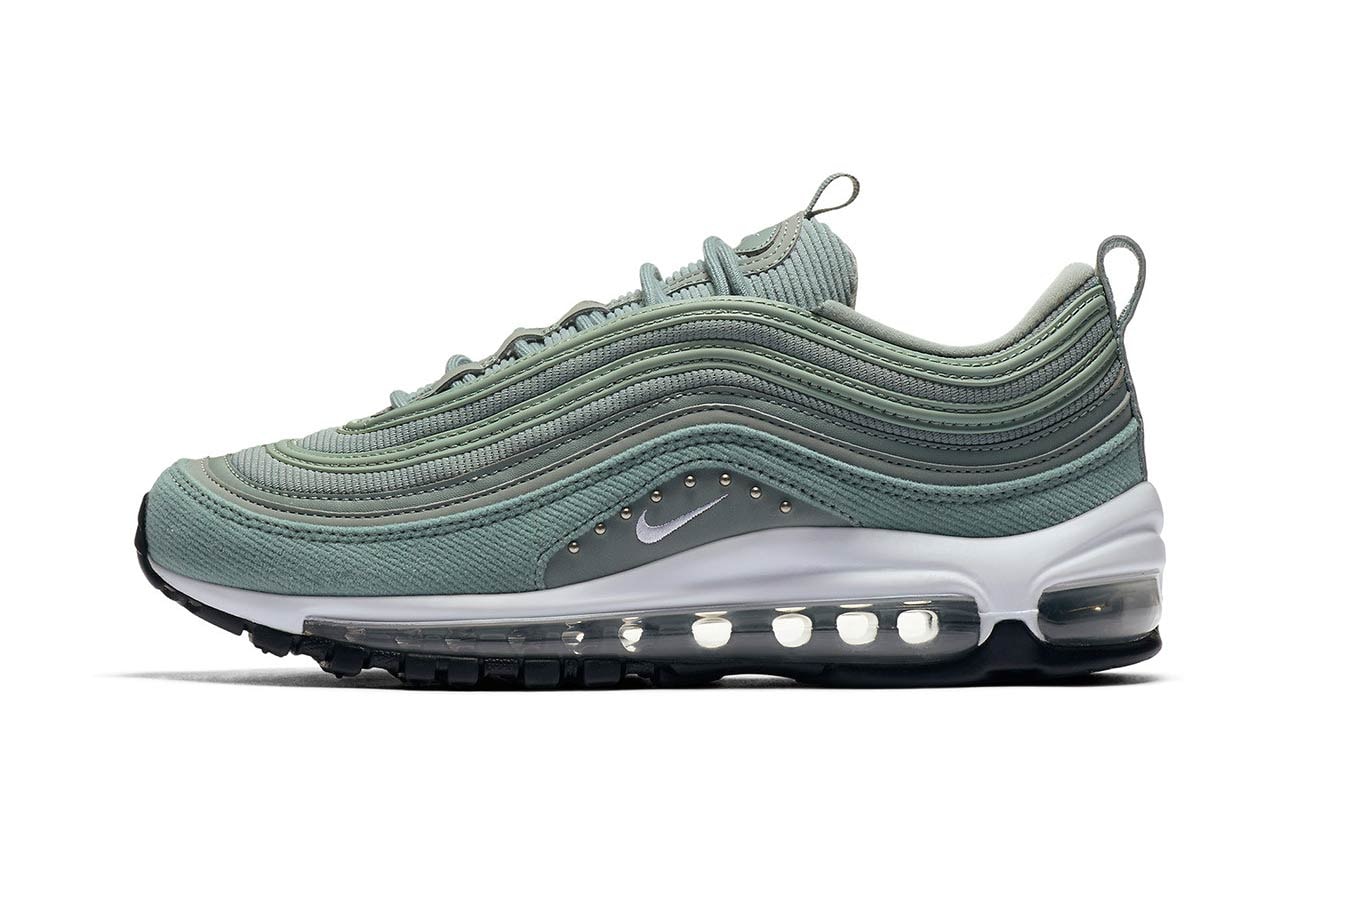 Nike's Air Max 97 SE Arrives in 